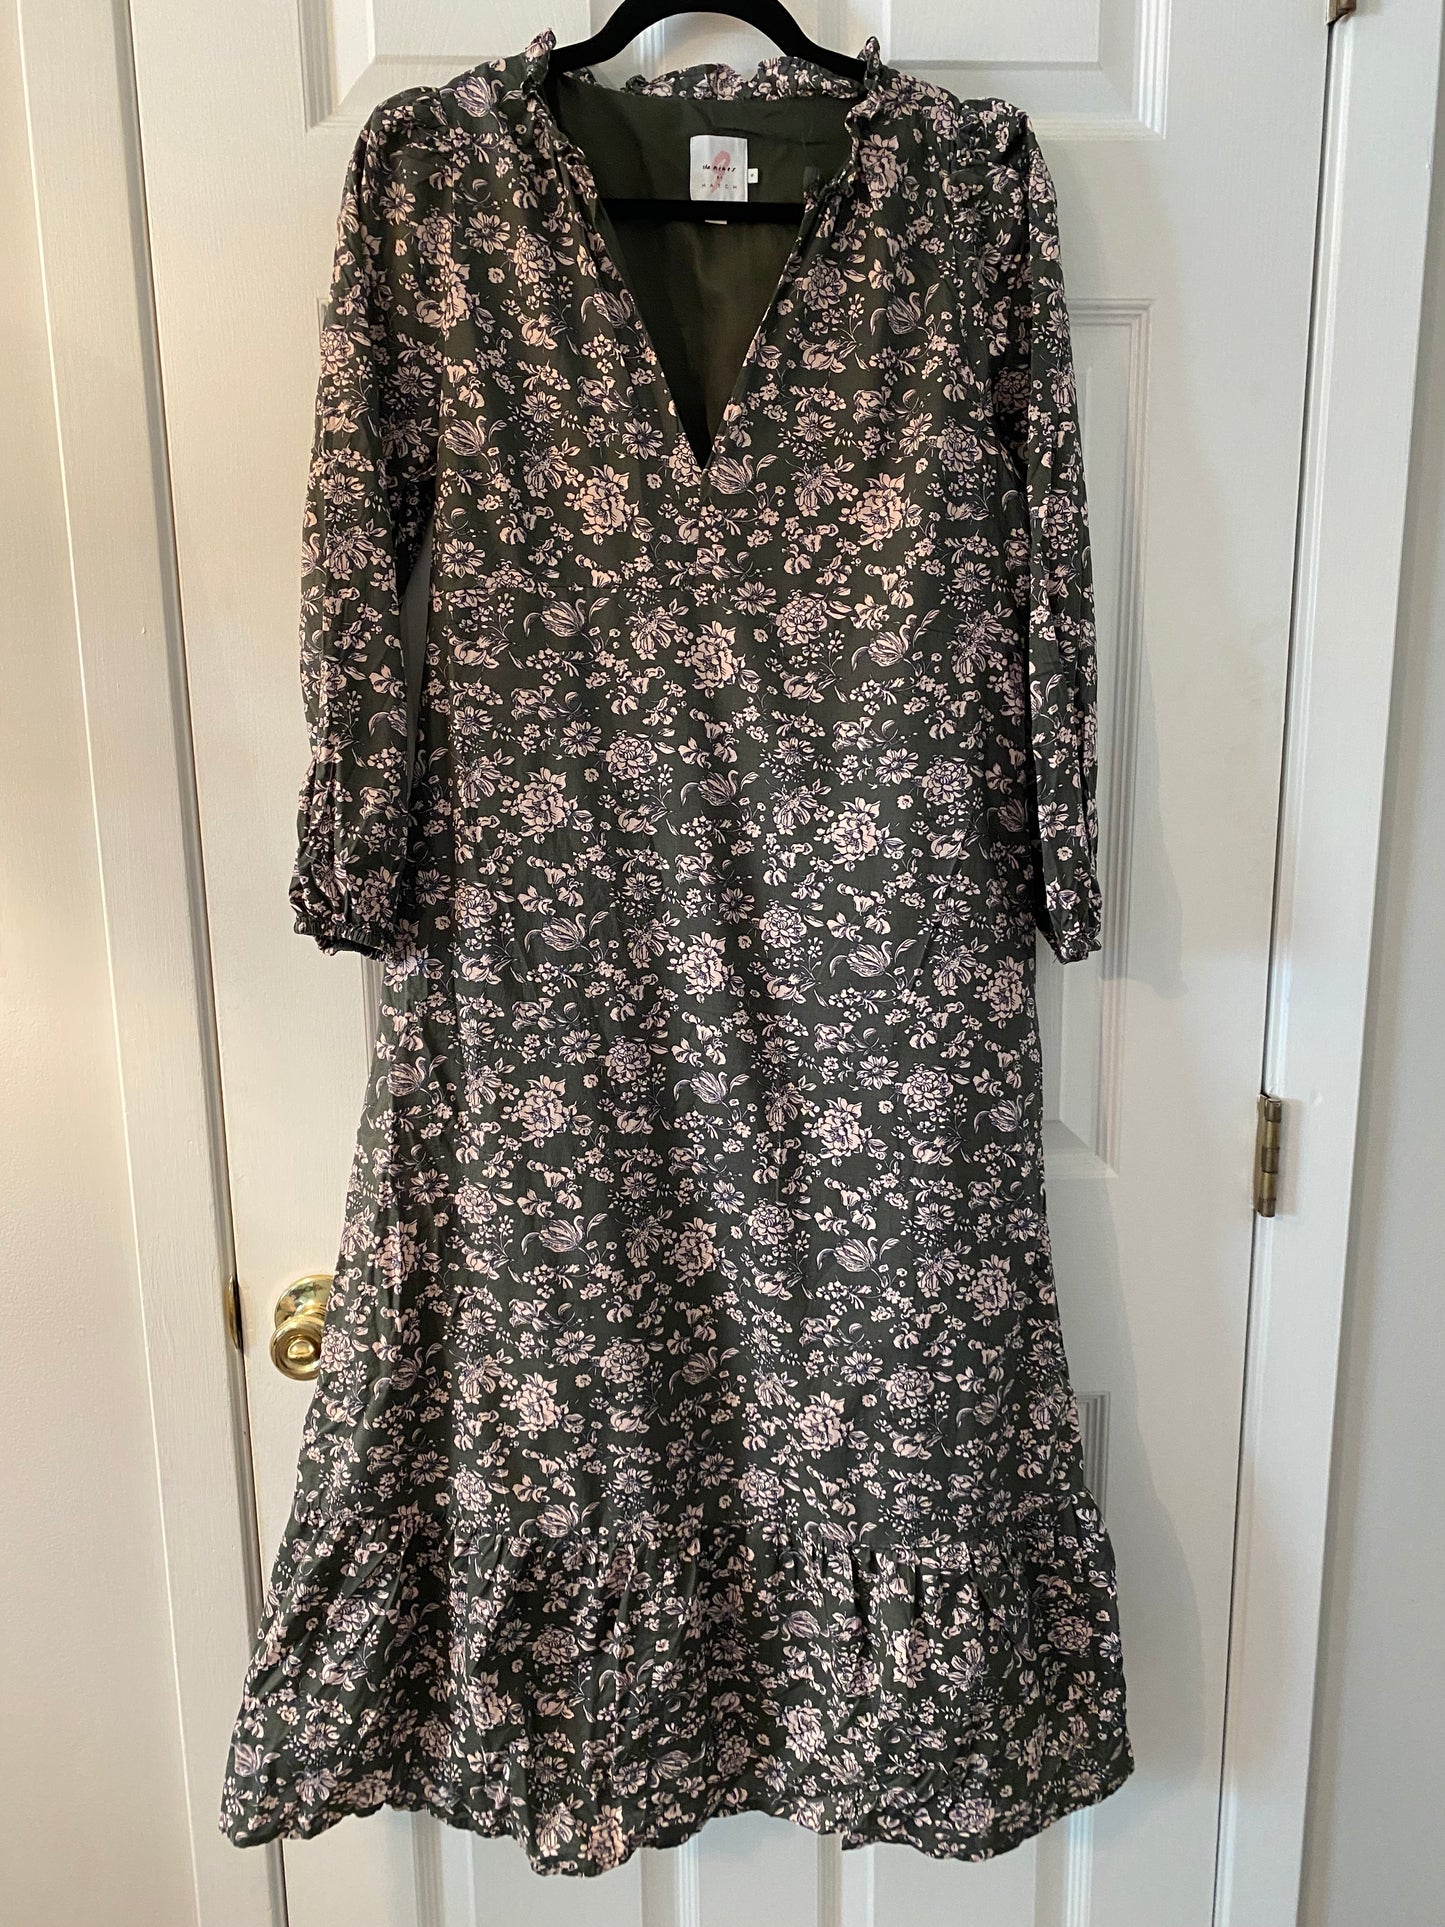 The Nines By Hatch Maternity Dress size Small